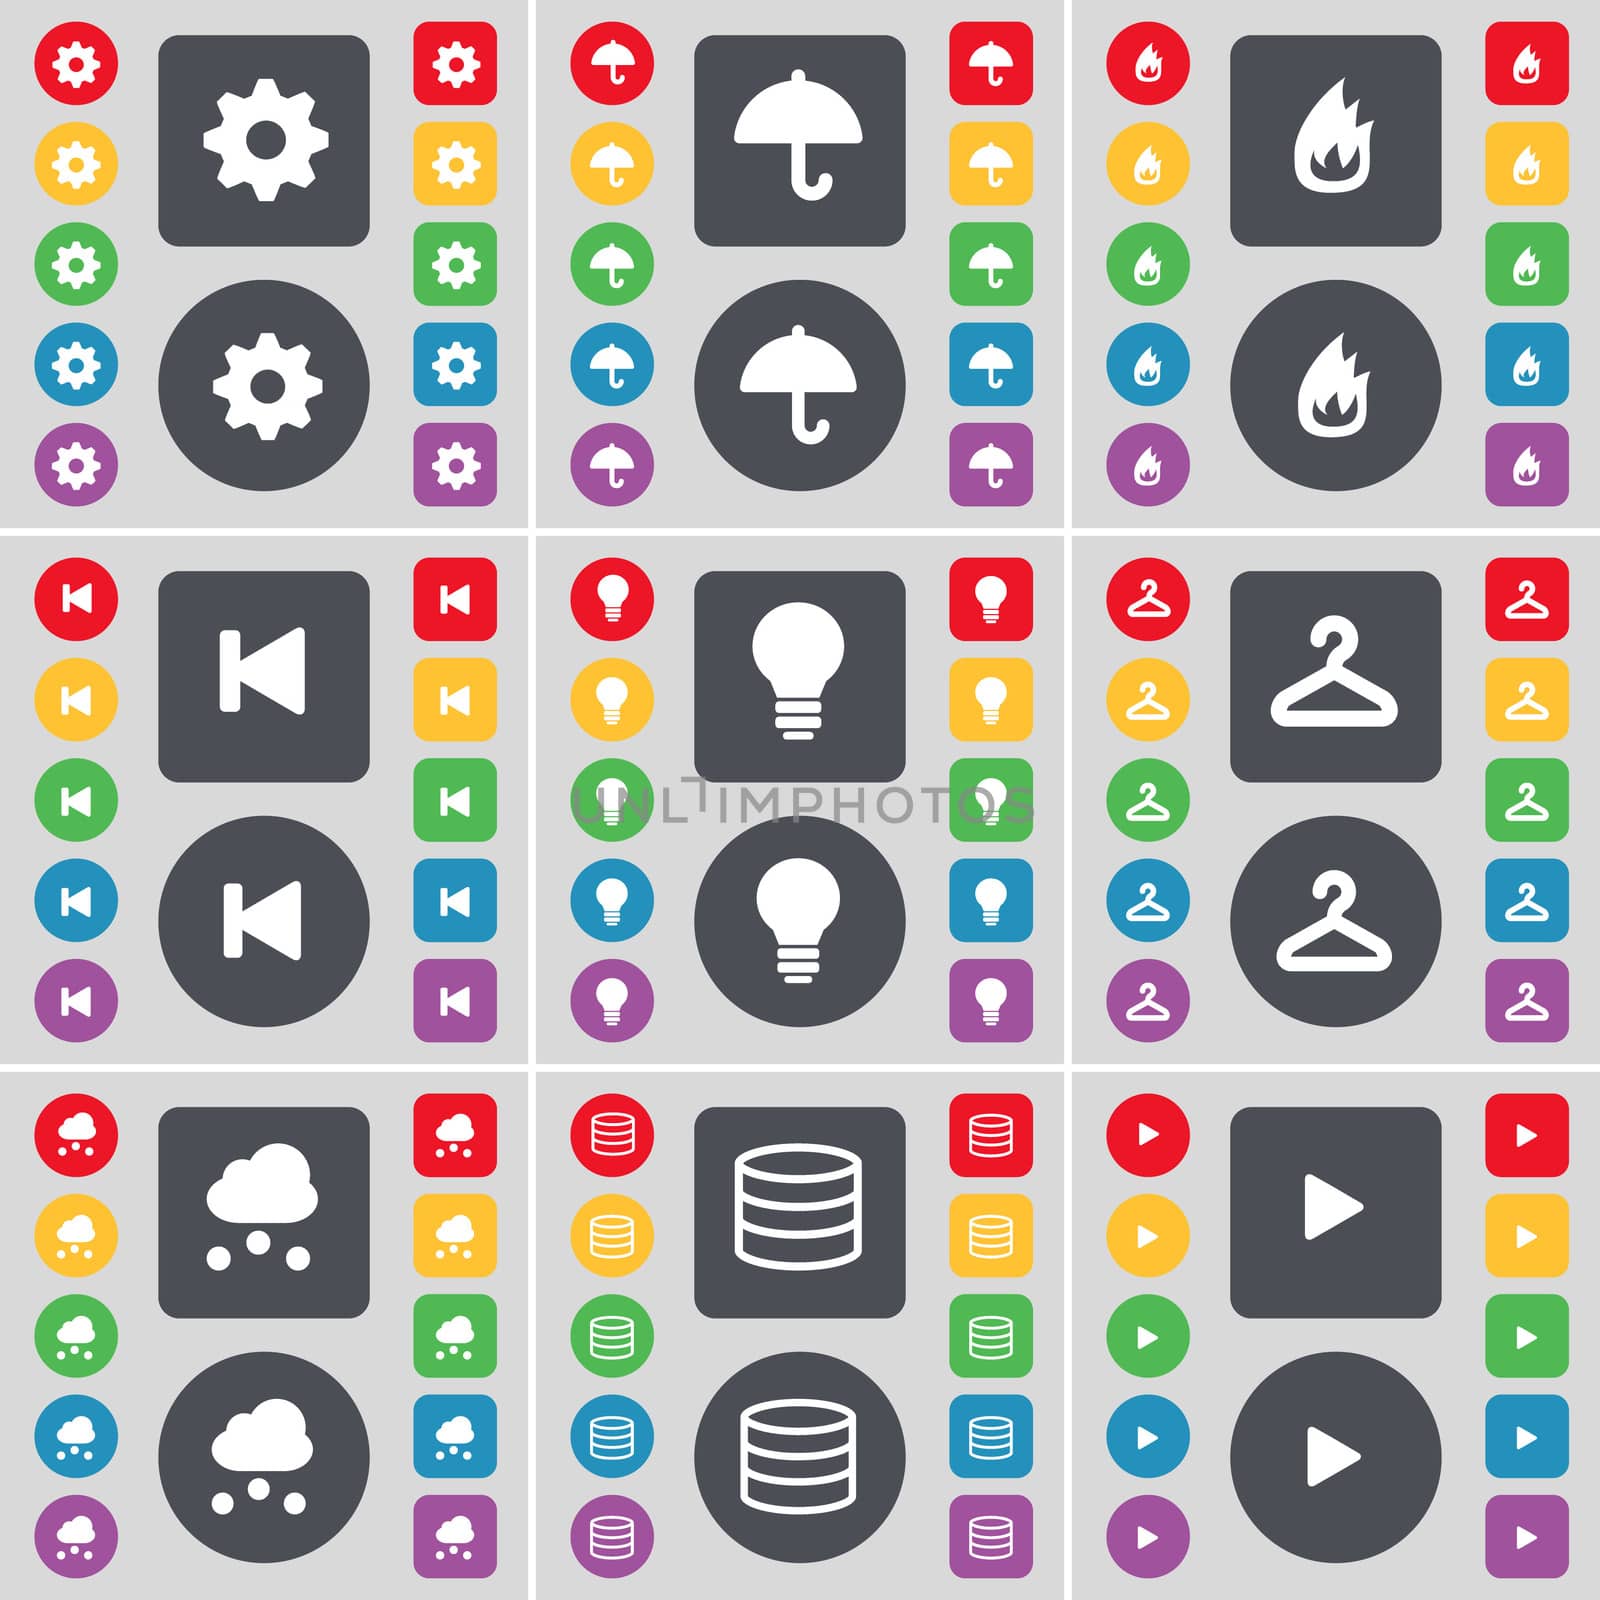 Gear, Umbrella, Fire, Media skip, Light bulb, Hanger, Cloud, Database, Media play icon symbol. A large set of flat, colored buttons for your design. illustration